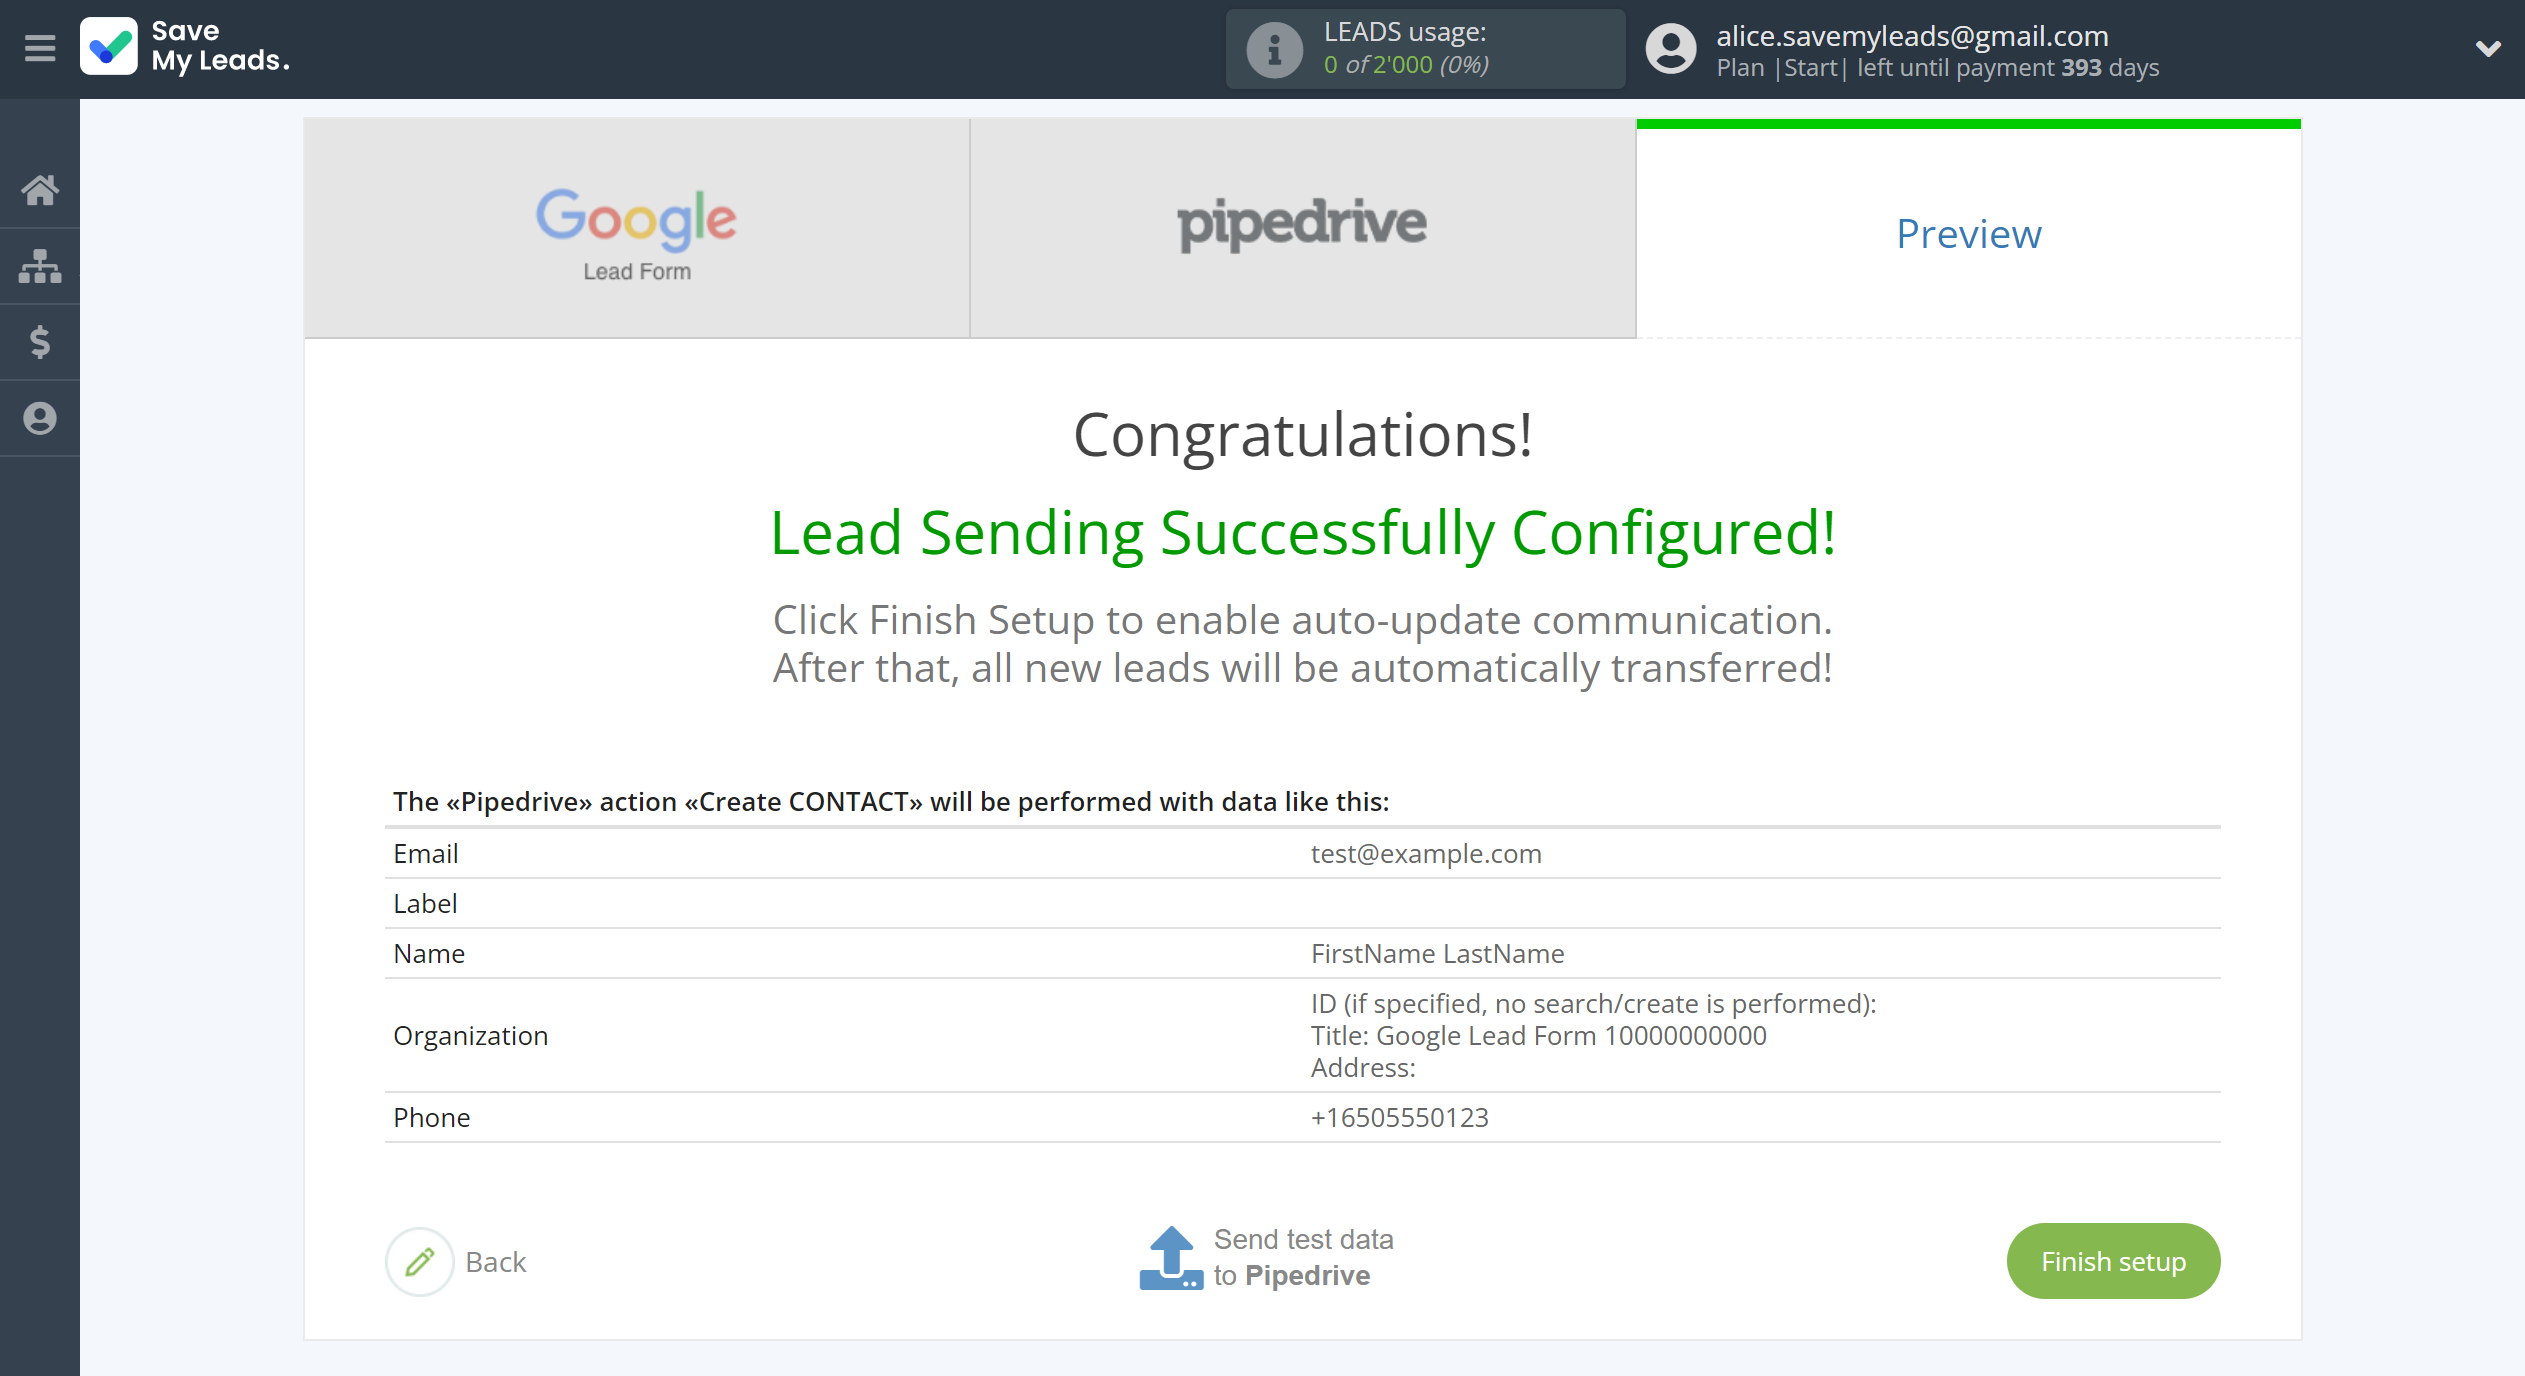 How to Connect Google Lead Form with Pipedrive Create Contacts | Test data